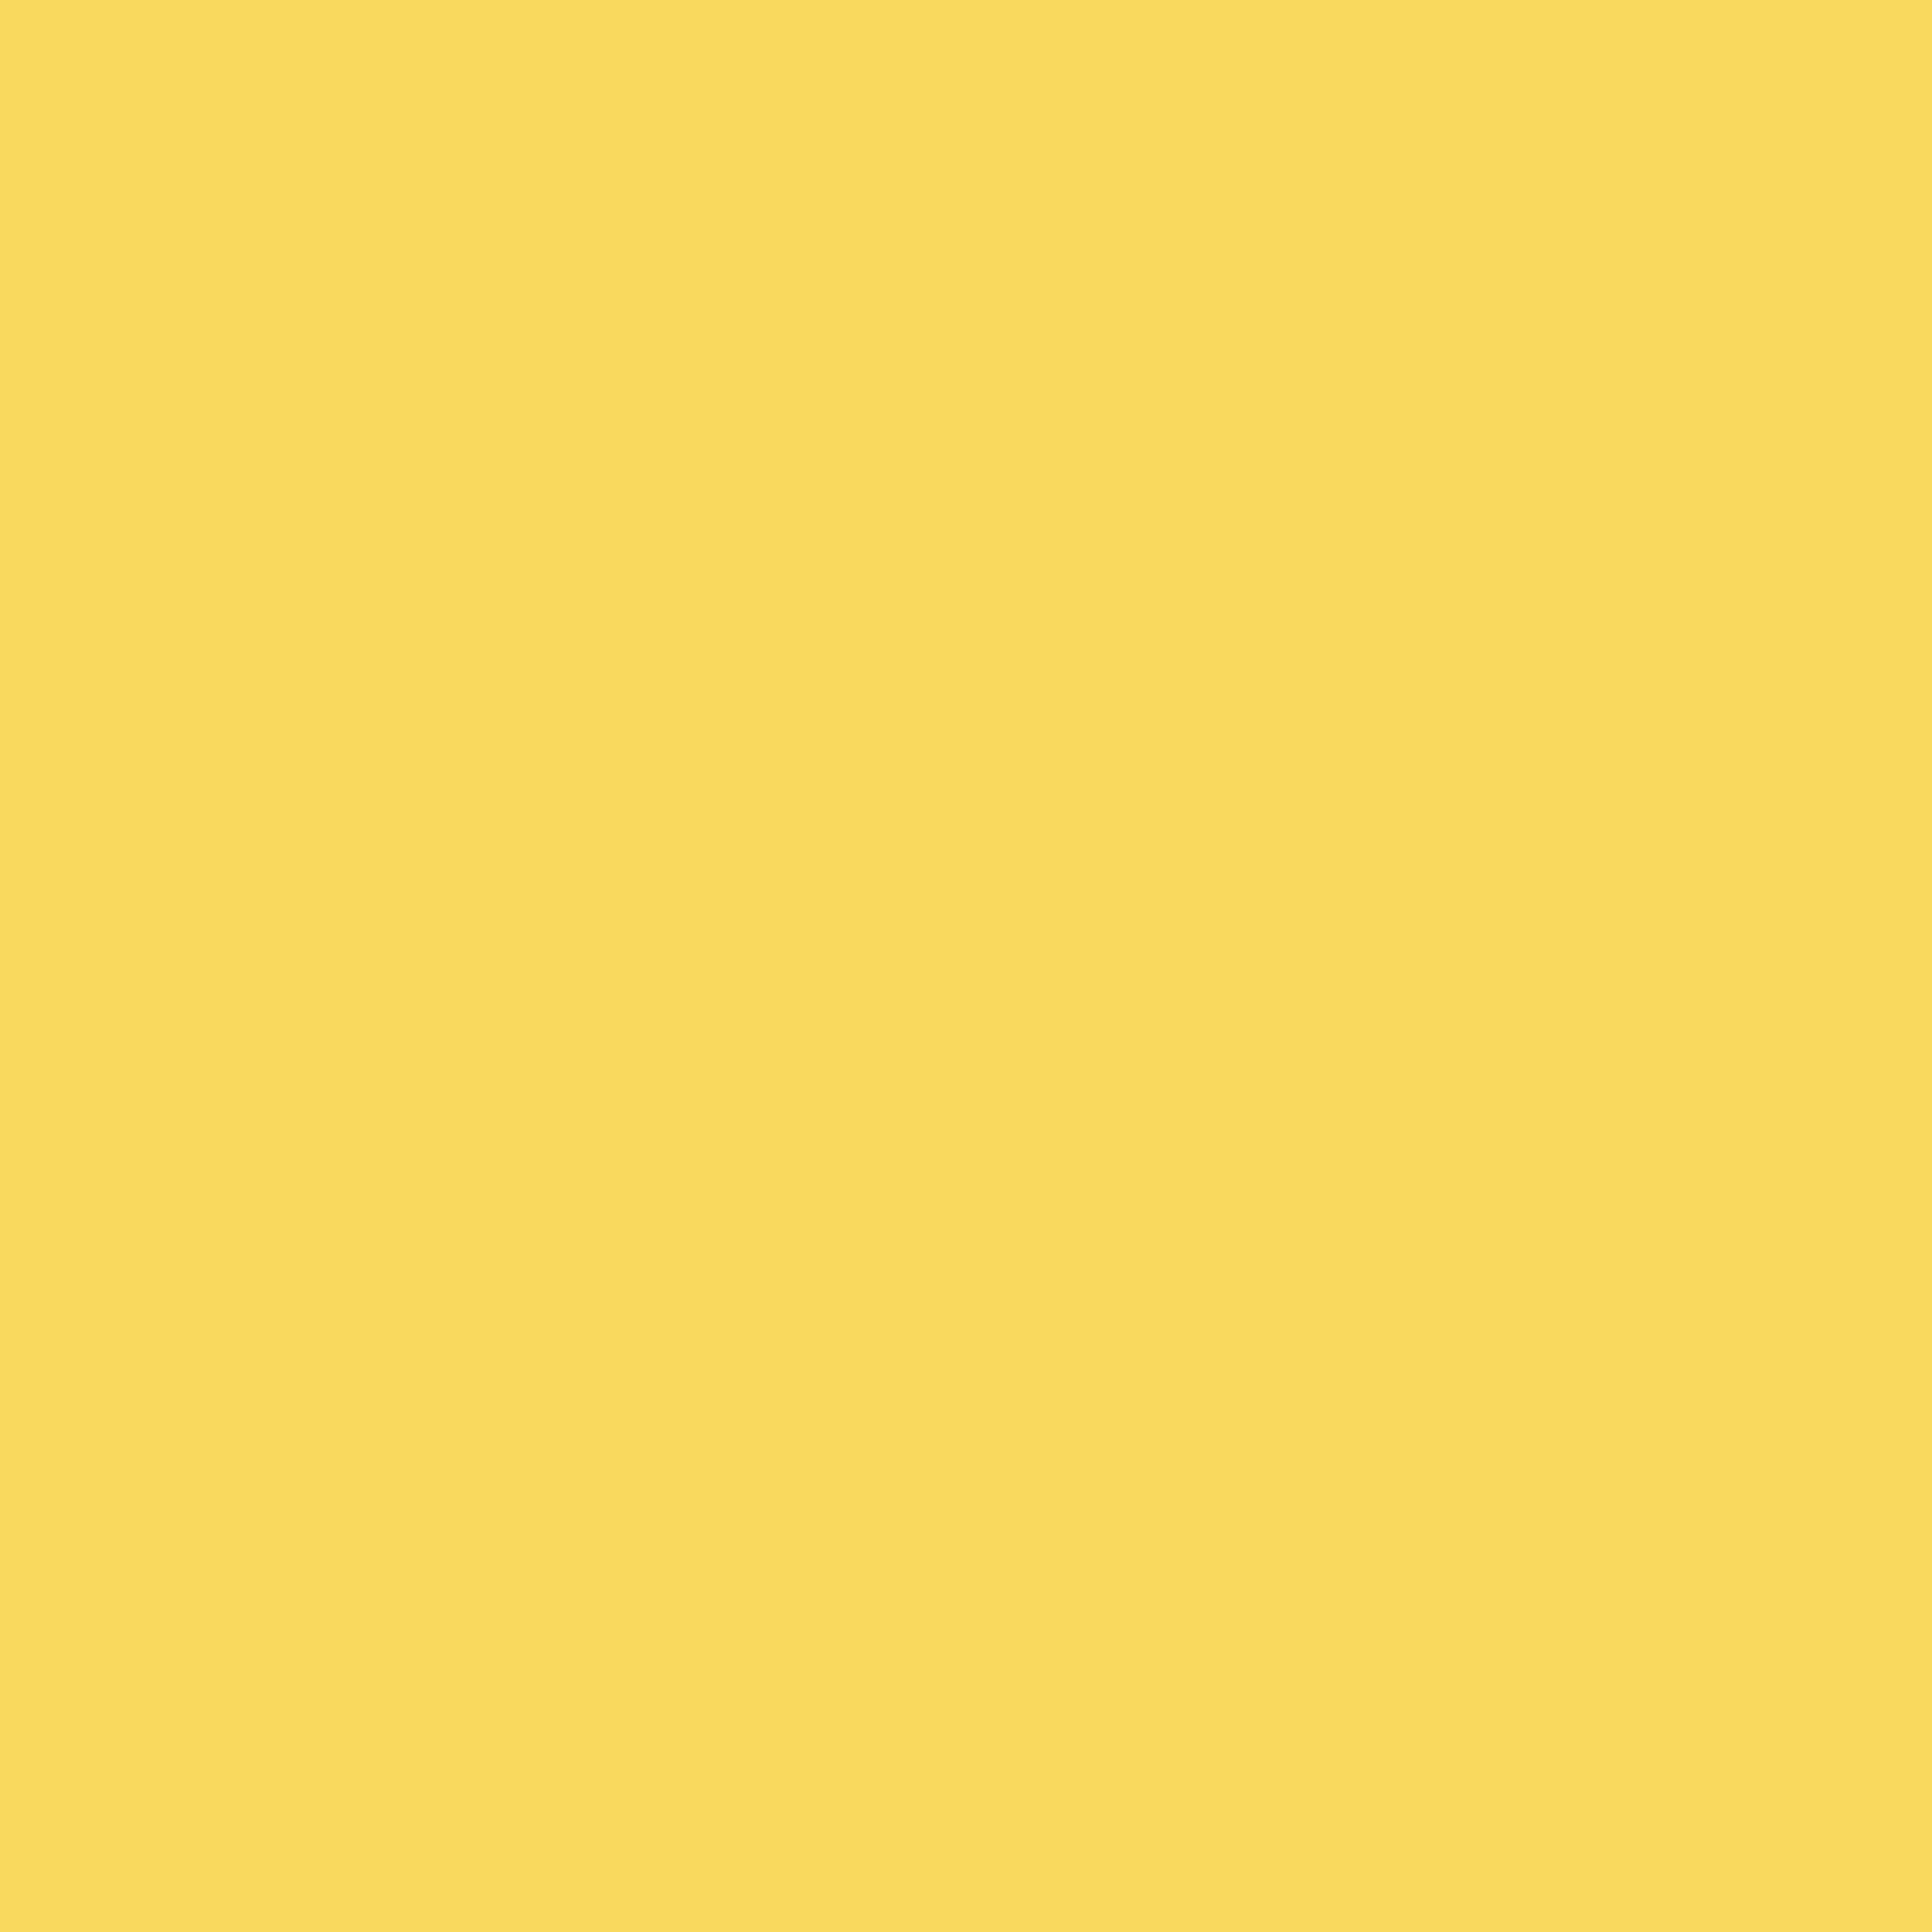 3600x3600 Royal Yellow Solid Color Background